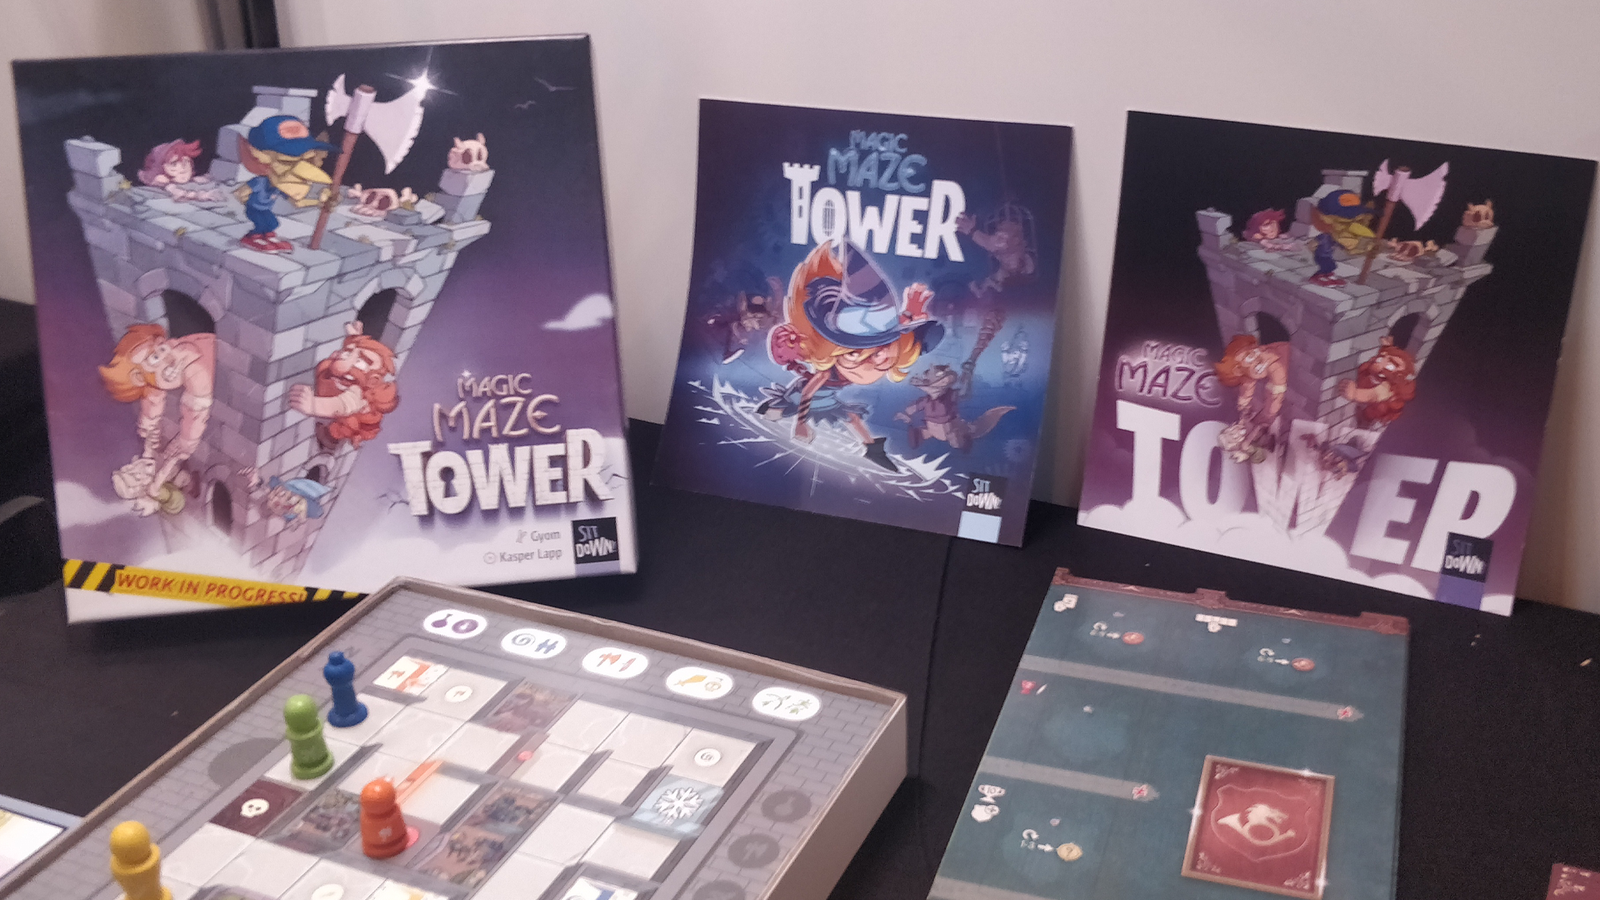 Magic Maze Tower removes timer for slower cerebral puzzle-solving